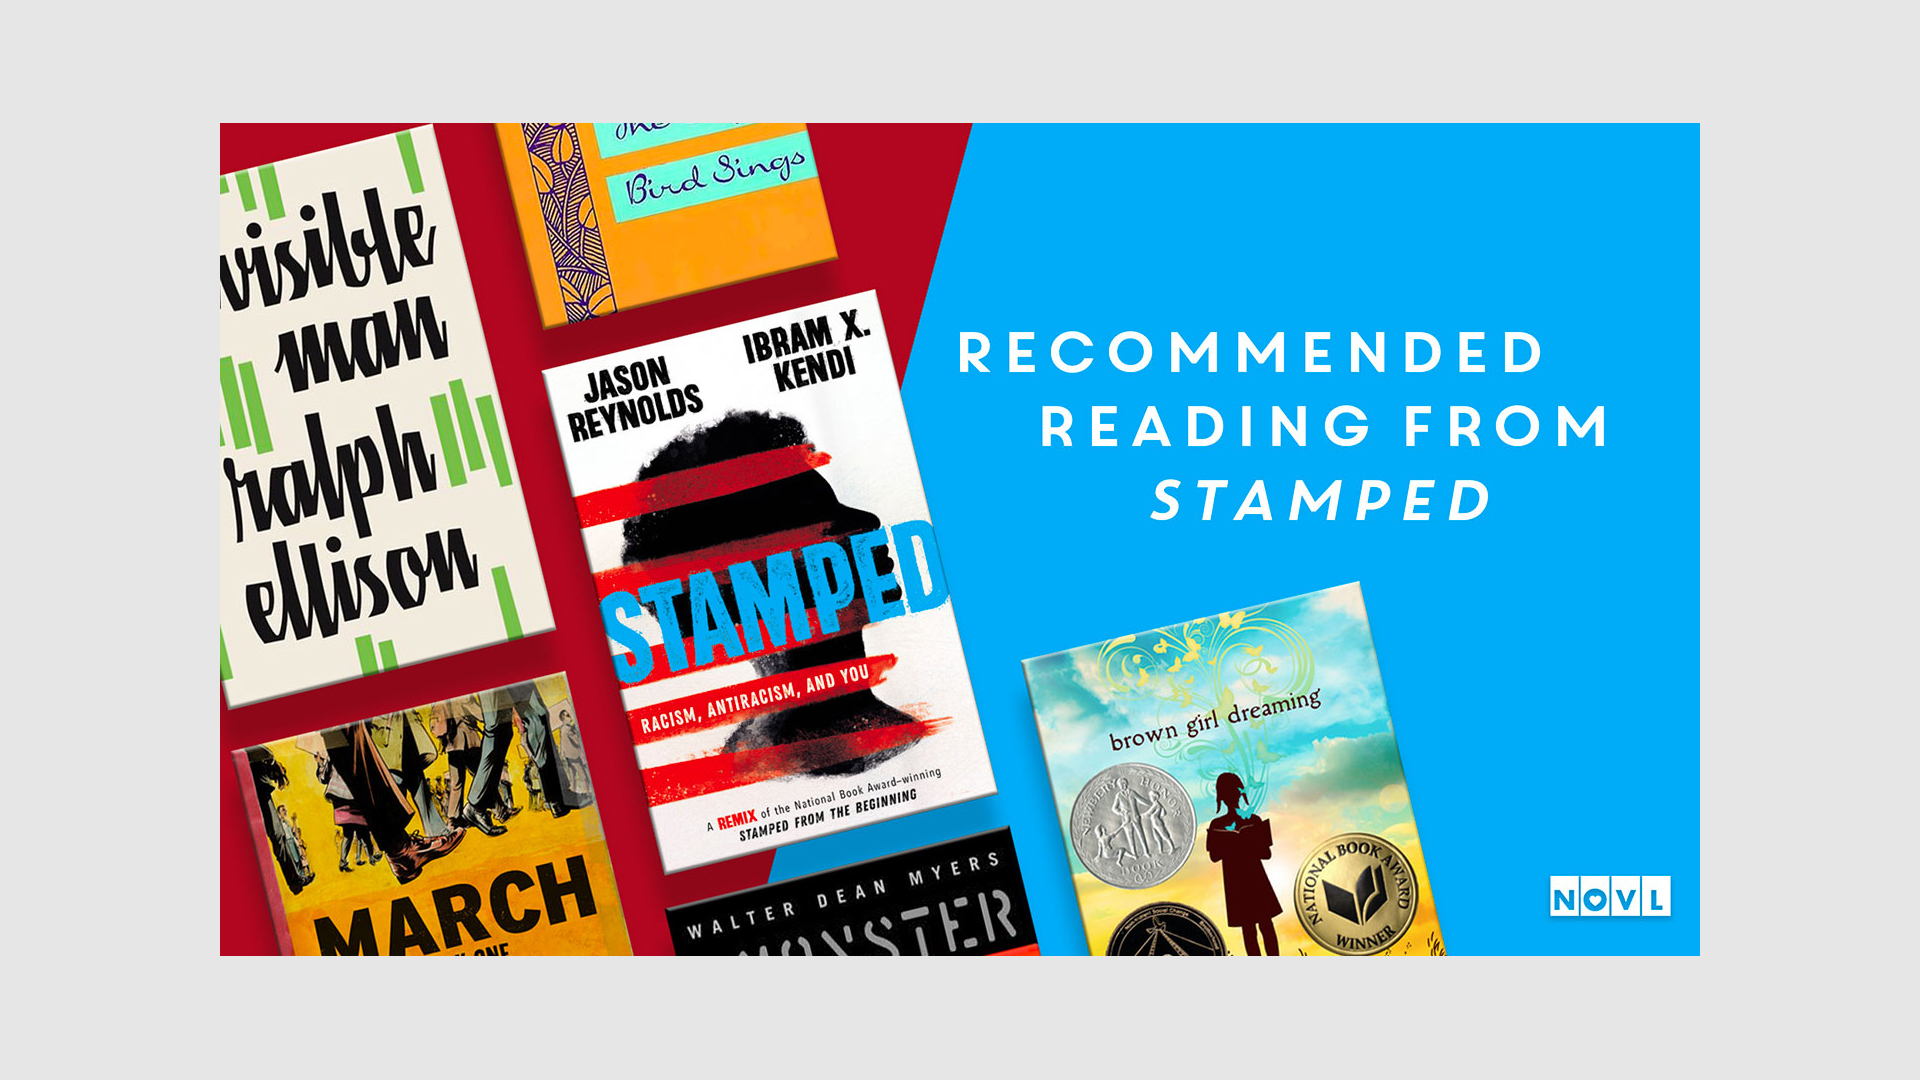 The NOVL Blog, Featured Image for Article: Recommended Reading from Stamped